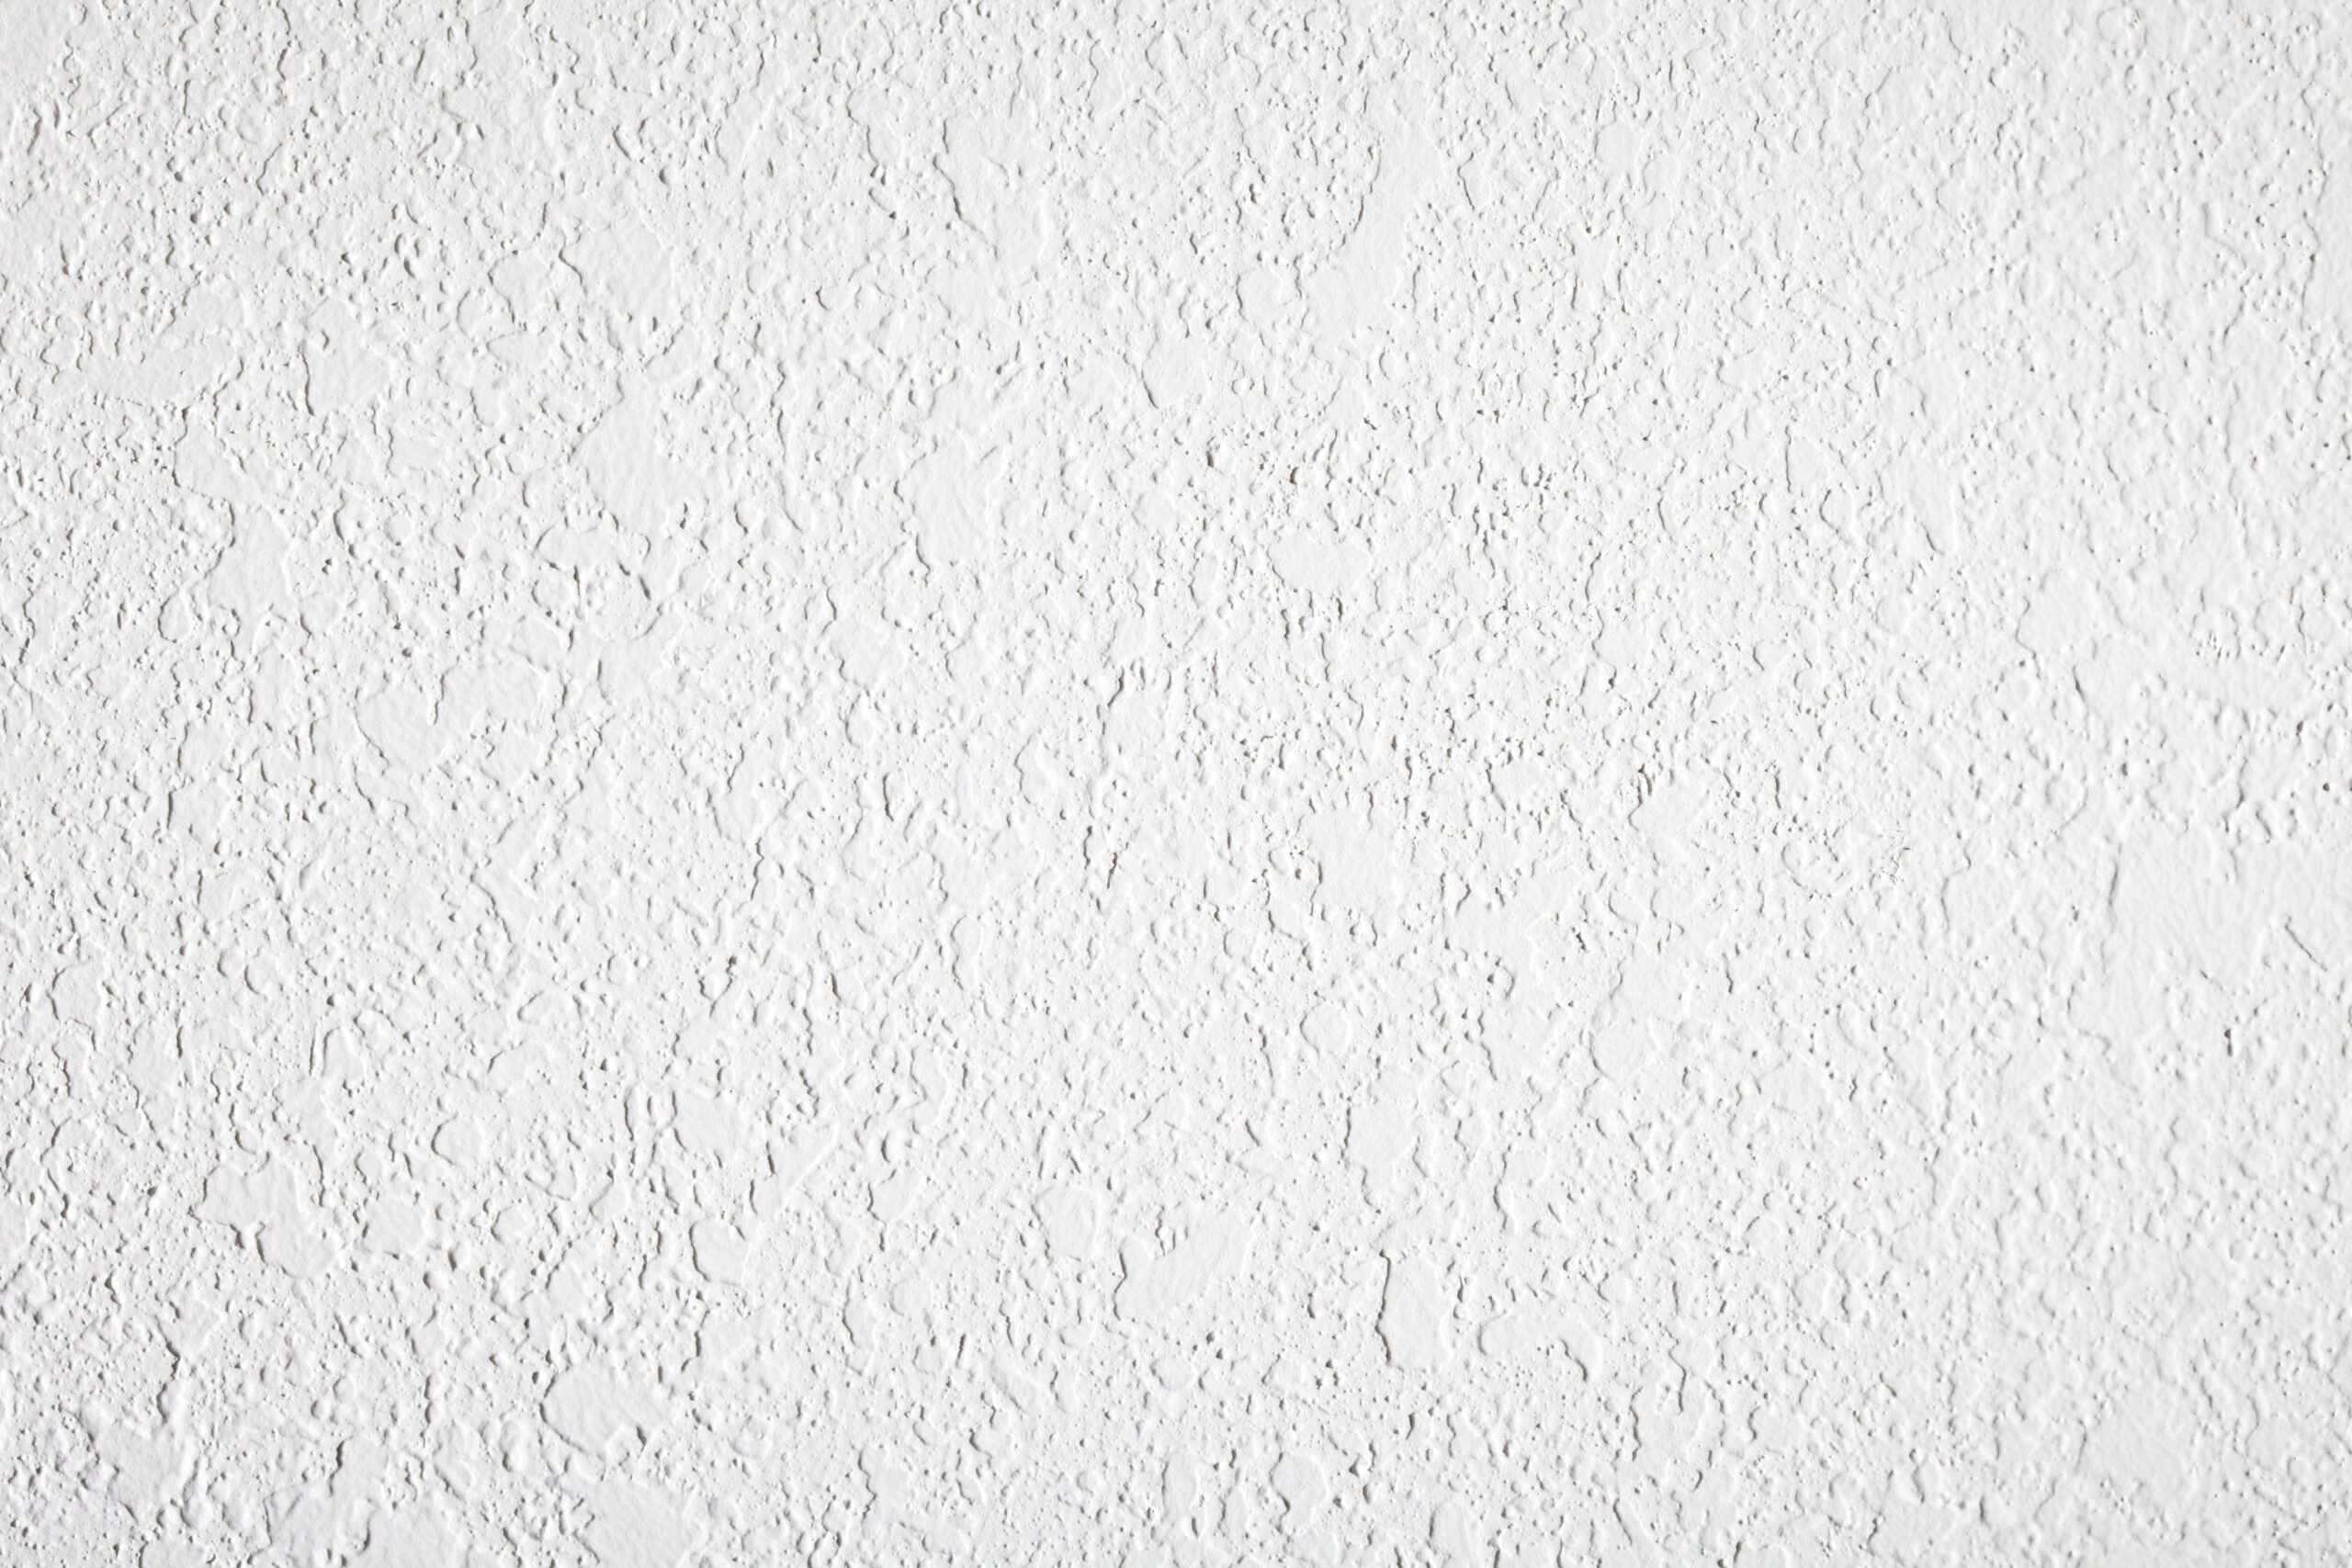 3 Types of Drywall Textures